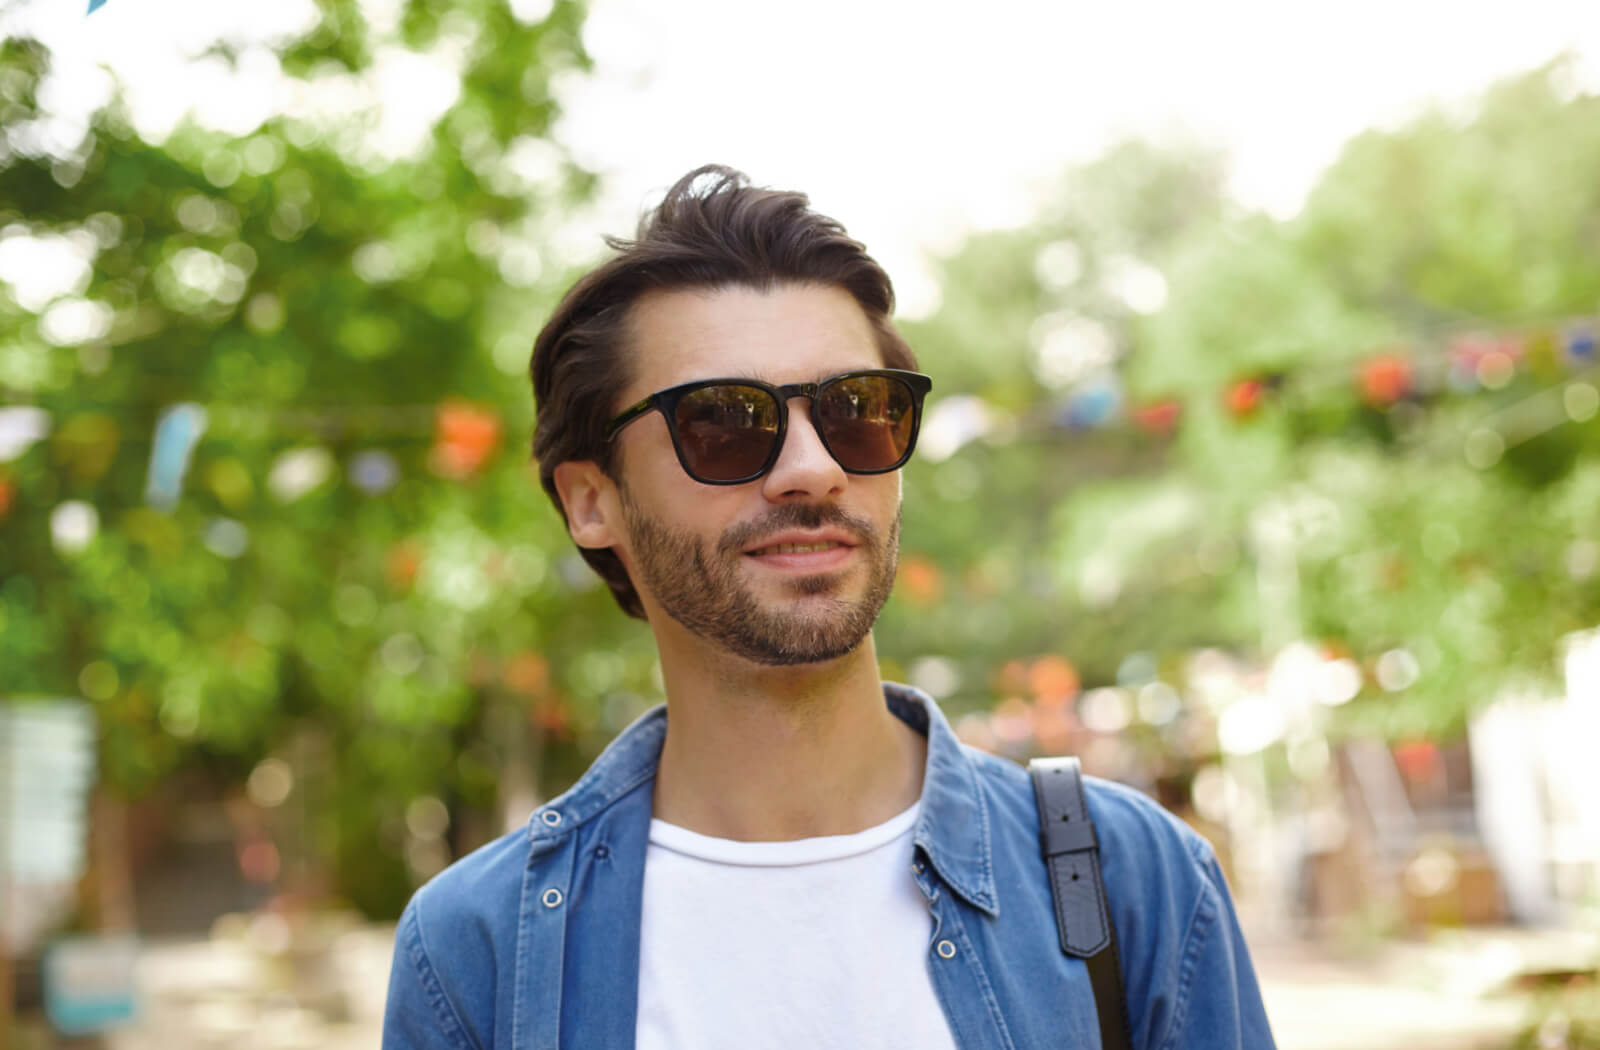 A young man in a denim jacket wearing sunglasses outdoors to protect his eyes.